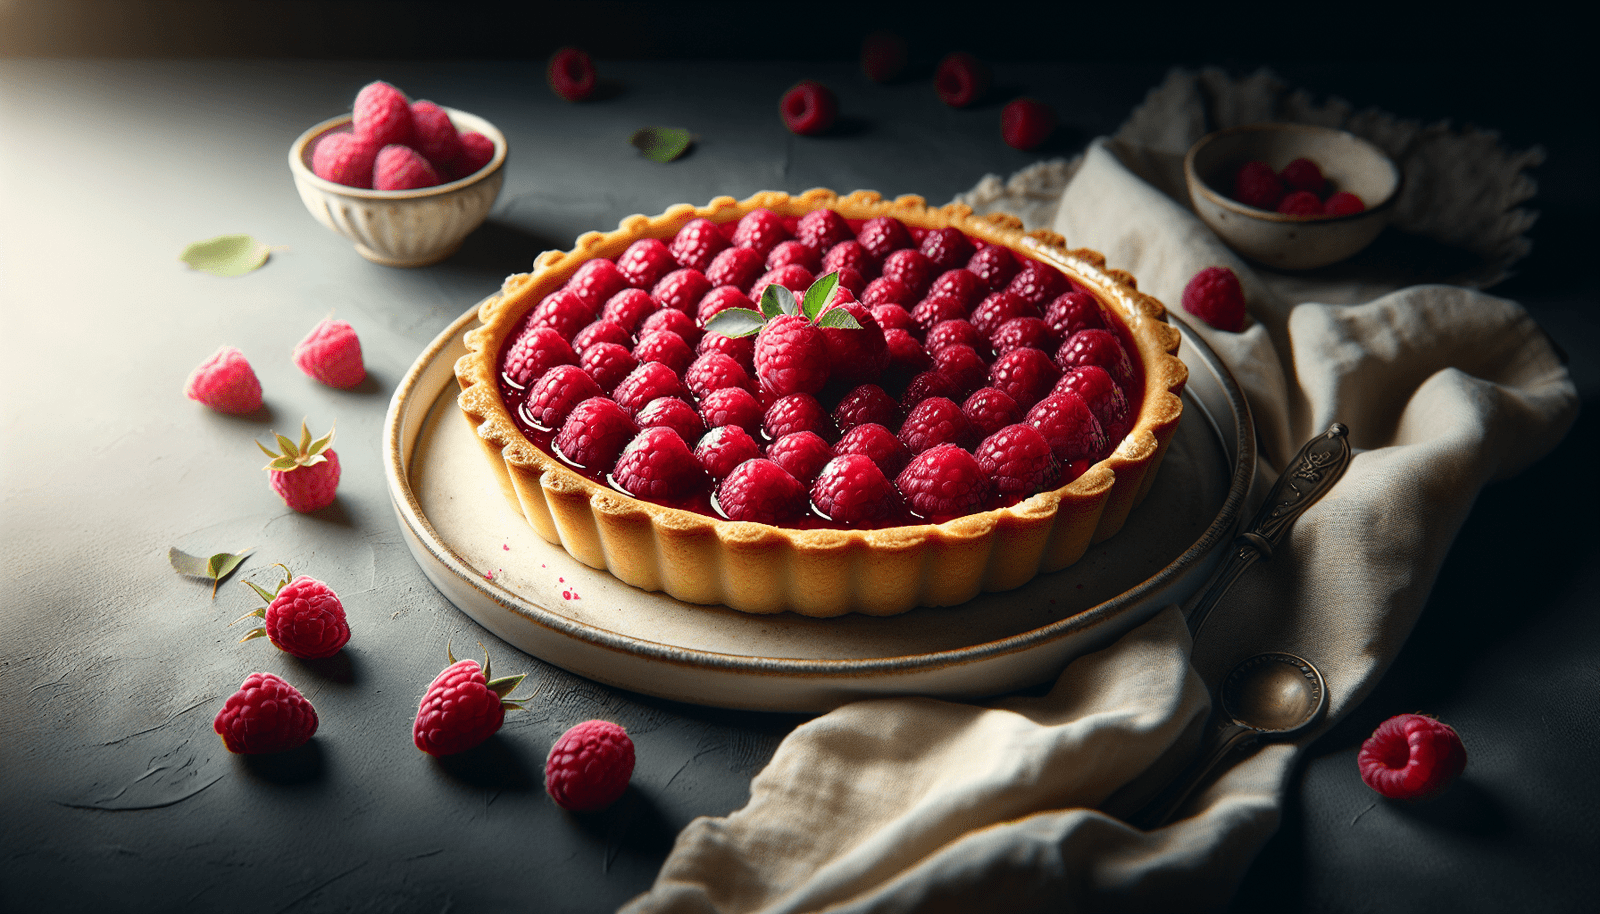 What Wine Would Complement A Raspberry Tart?